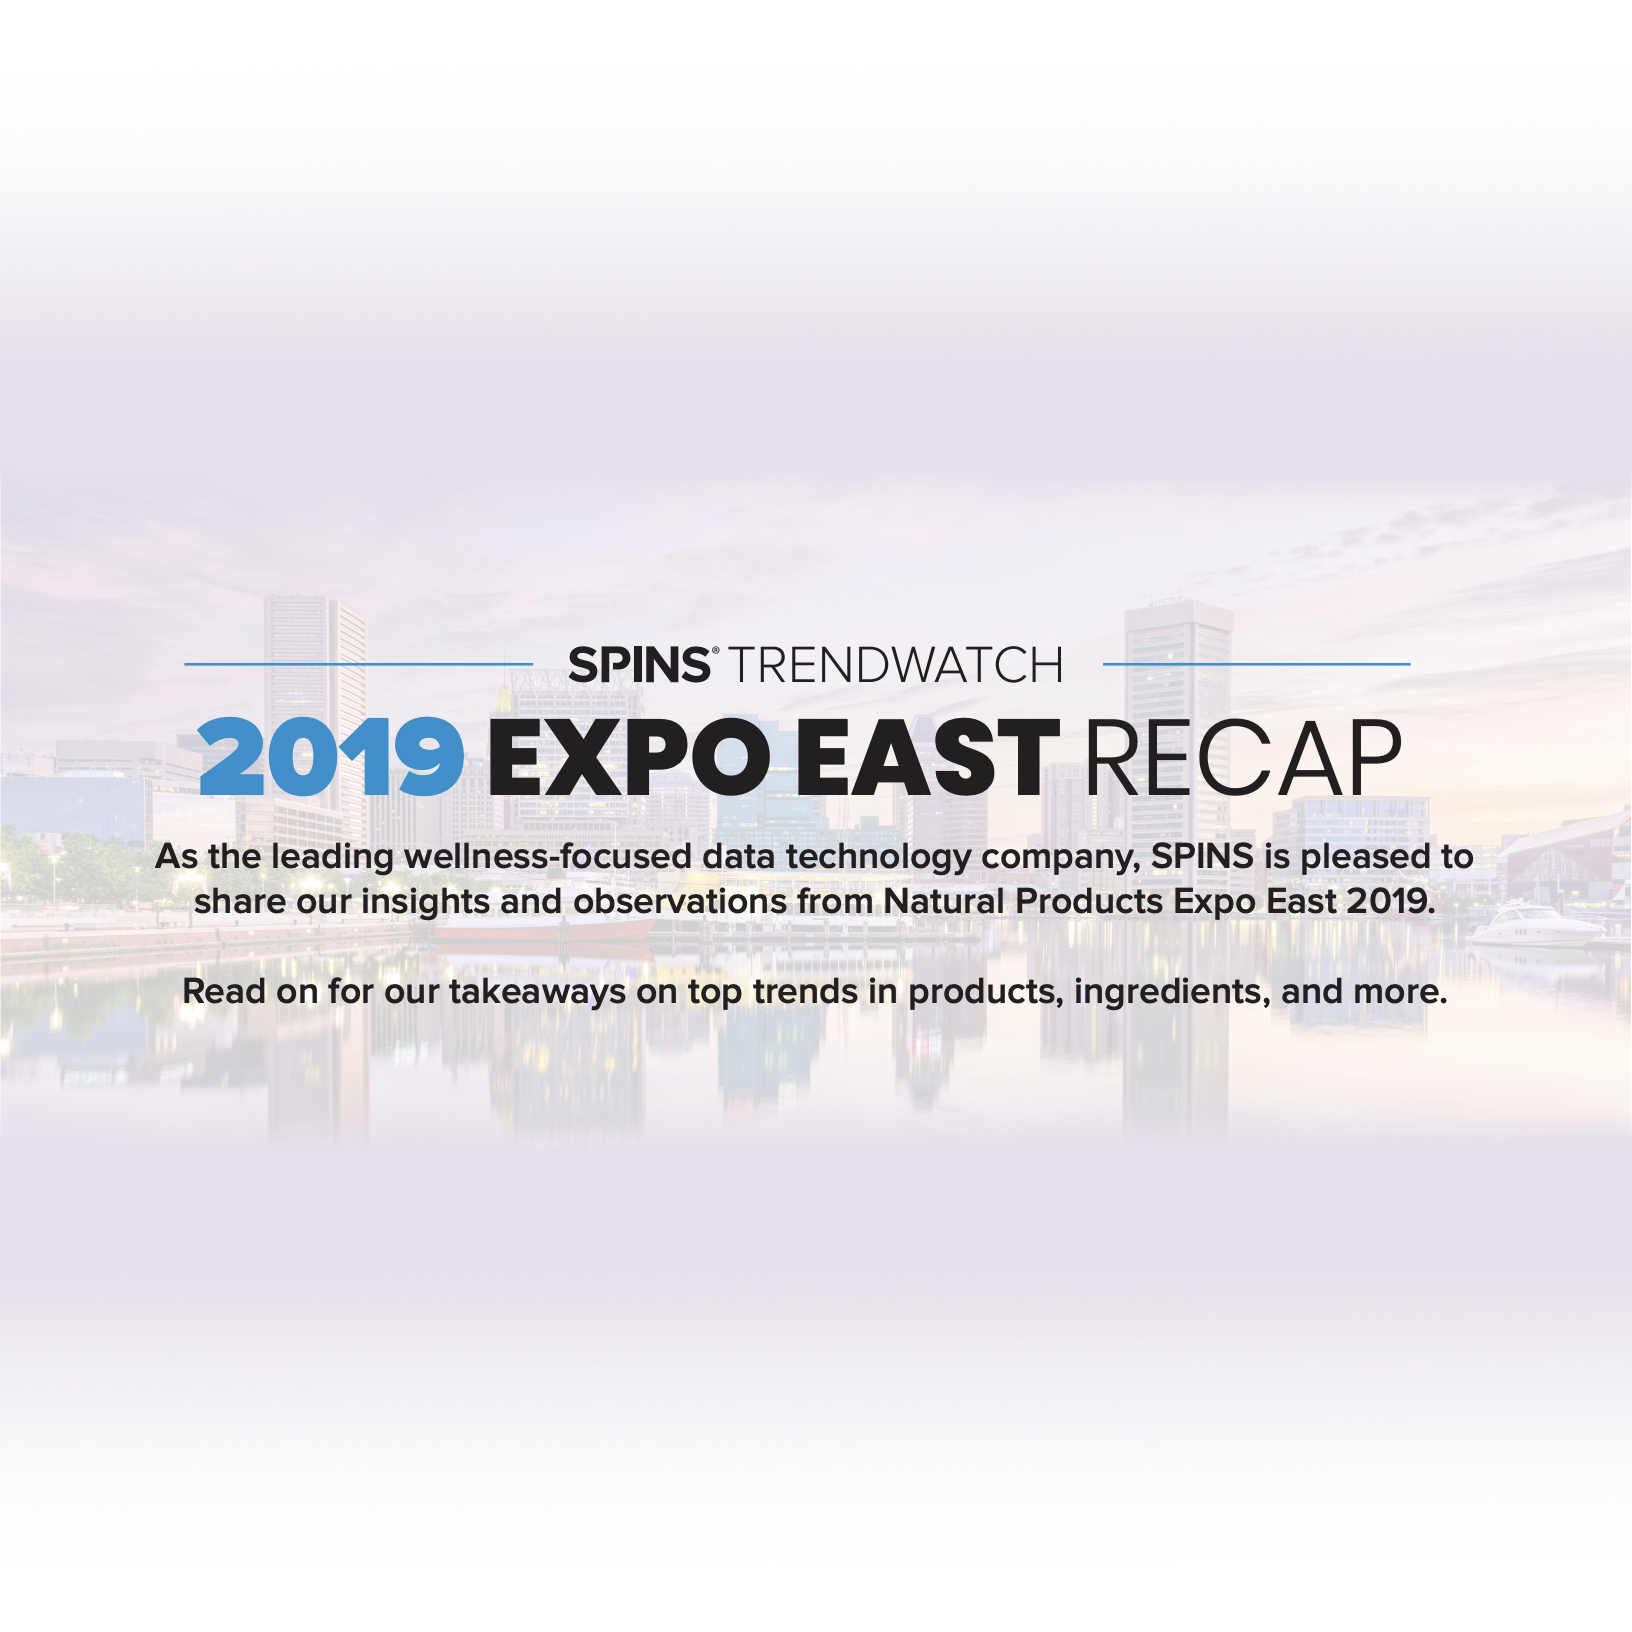 2019 Expo East Recap from Spins